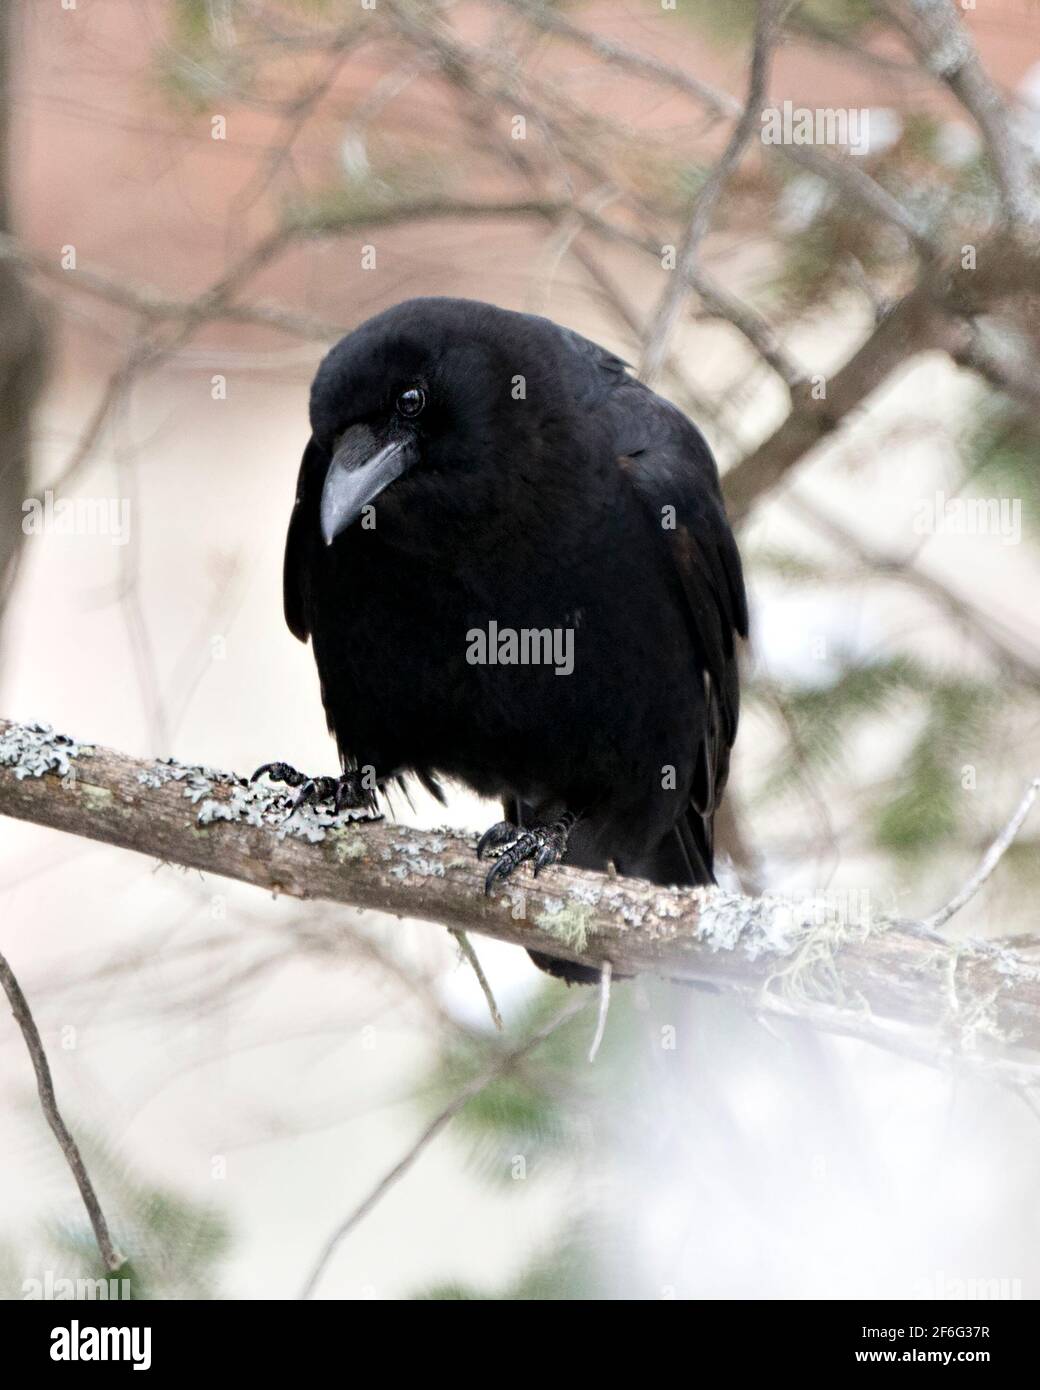 Raven bird perched on a tree branch with blur forest background displaying black feather plumage in its environment and habitat. Crow Stock Photos. Stock Photo